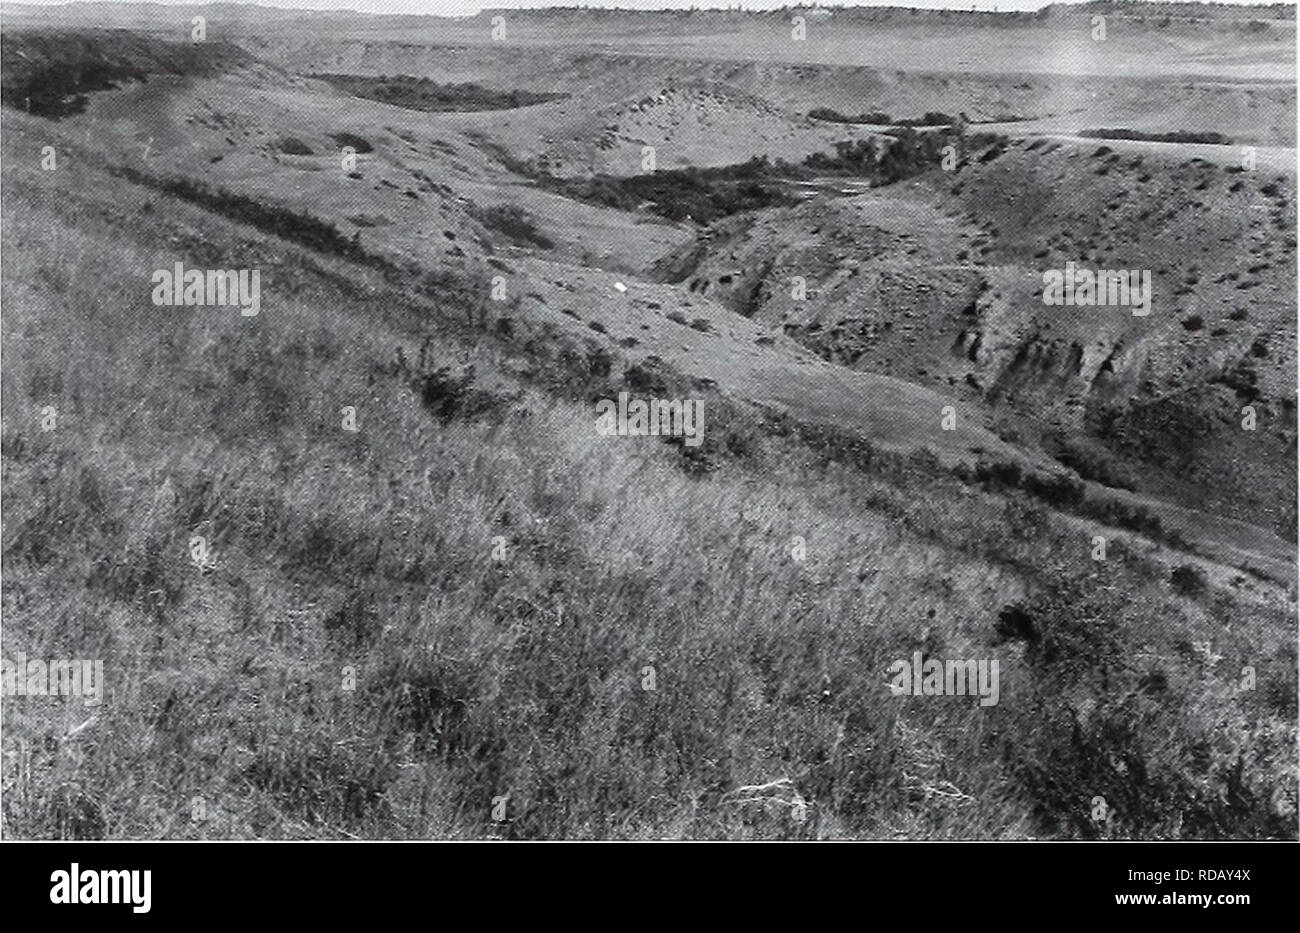 . Eighty years of vegetation and landscape changes in the Northern Great Plains : a photographic record. Range plants; Landscape; Botany; forbs; grasses; landscapes; botanical composition; shrubs; trees. Original Photograph September 18, 1917. Shantz P-l-1917. Facing west-northwest. First Retake and Description June 30. 1959. W.S.P., H-2-1959. Looking WNW the origi- nal vegetation is Bouteloua spp. and Koeleria cristata. Carex Jilifolia is abundant in flat areas. Shrub in grass is Artemisia frig ida. Shepherdia canadensis is a common shrub on the hillsides and bottom- lands. Erosion not eviden Stock Photo